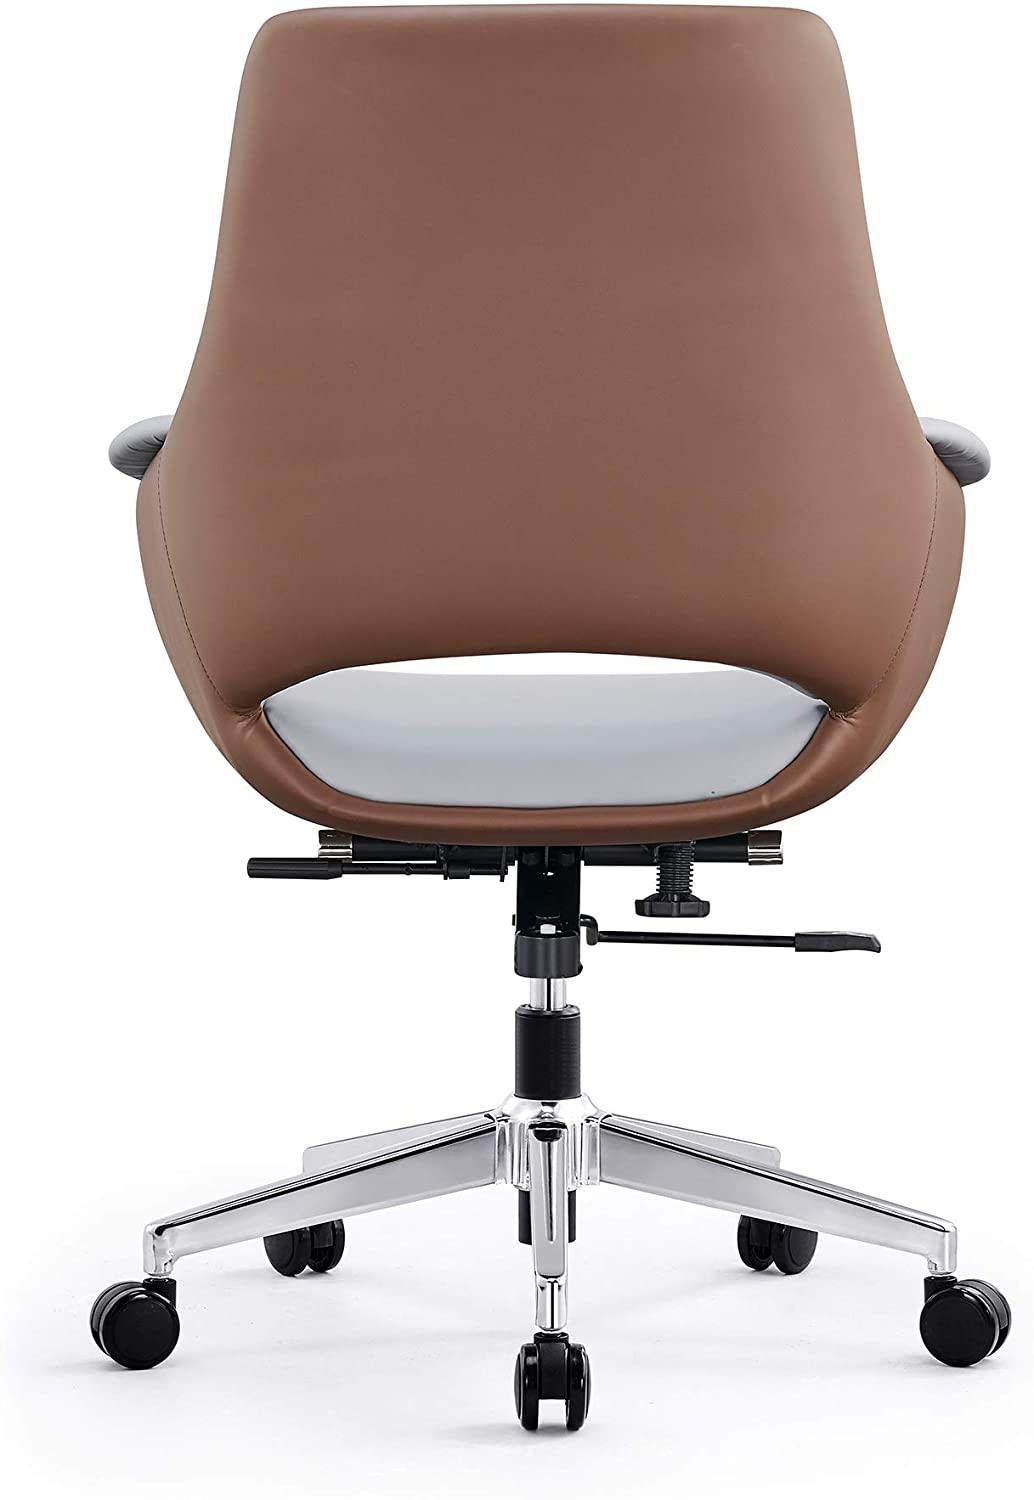 Adjustable Middle Back Home Office Chair Height Swivel PU Upholstered Modern Office Chair, Soft Thick Pad & Tiltable Back, Easy to Assemble - Bosonshop